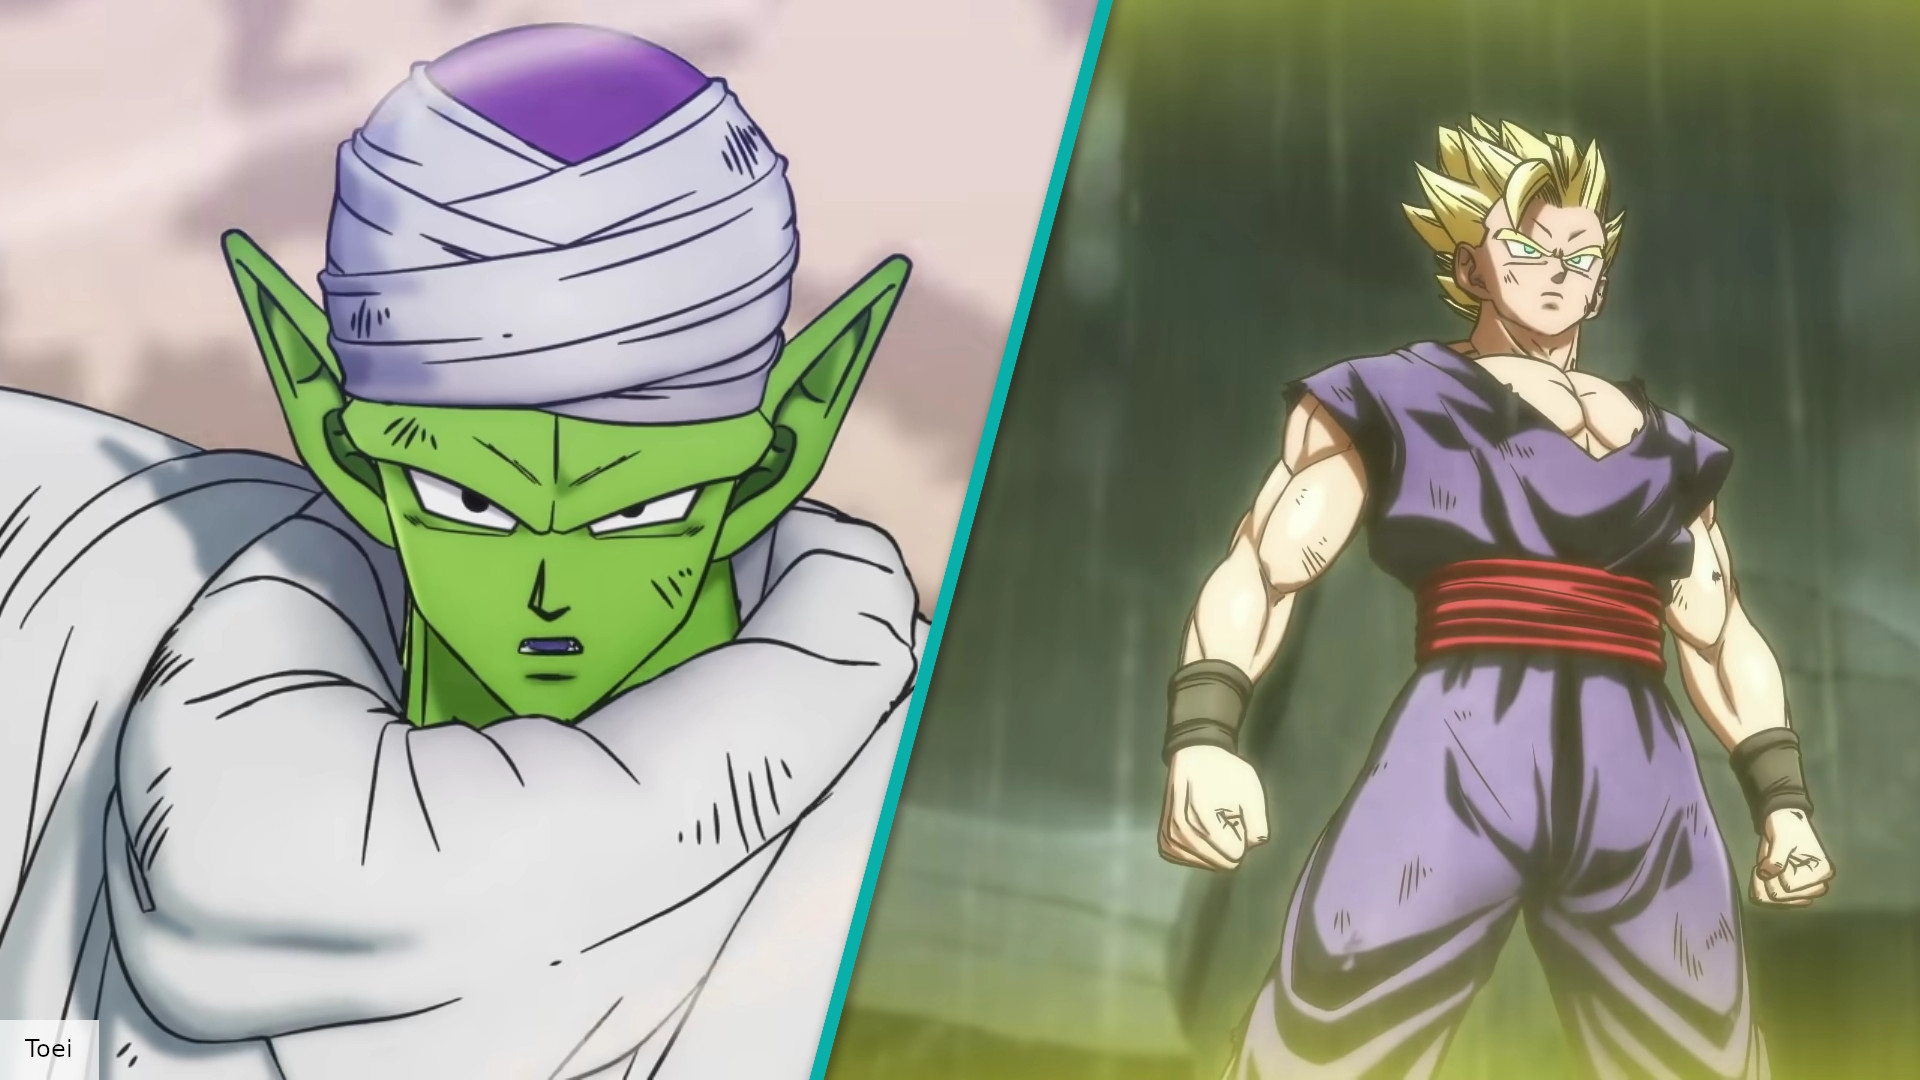 Dragon Ball Super: Super Hero Teases New Forms For Gohan and Piccolo